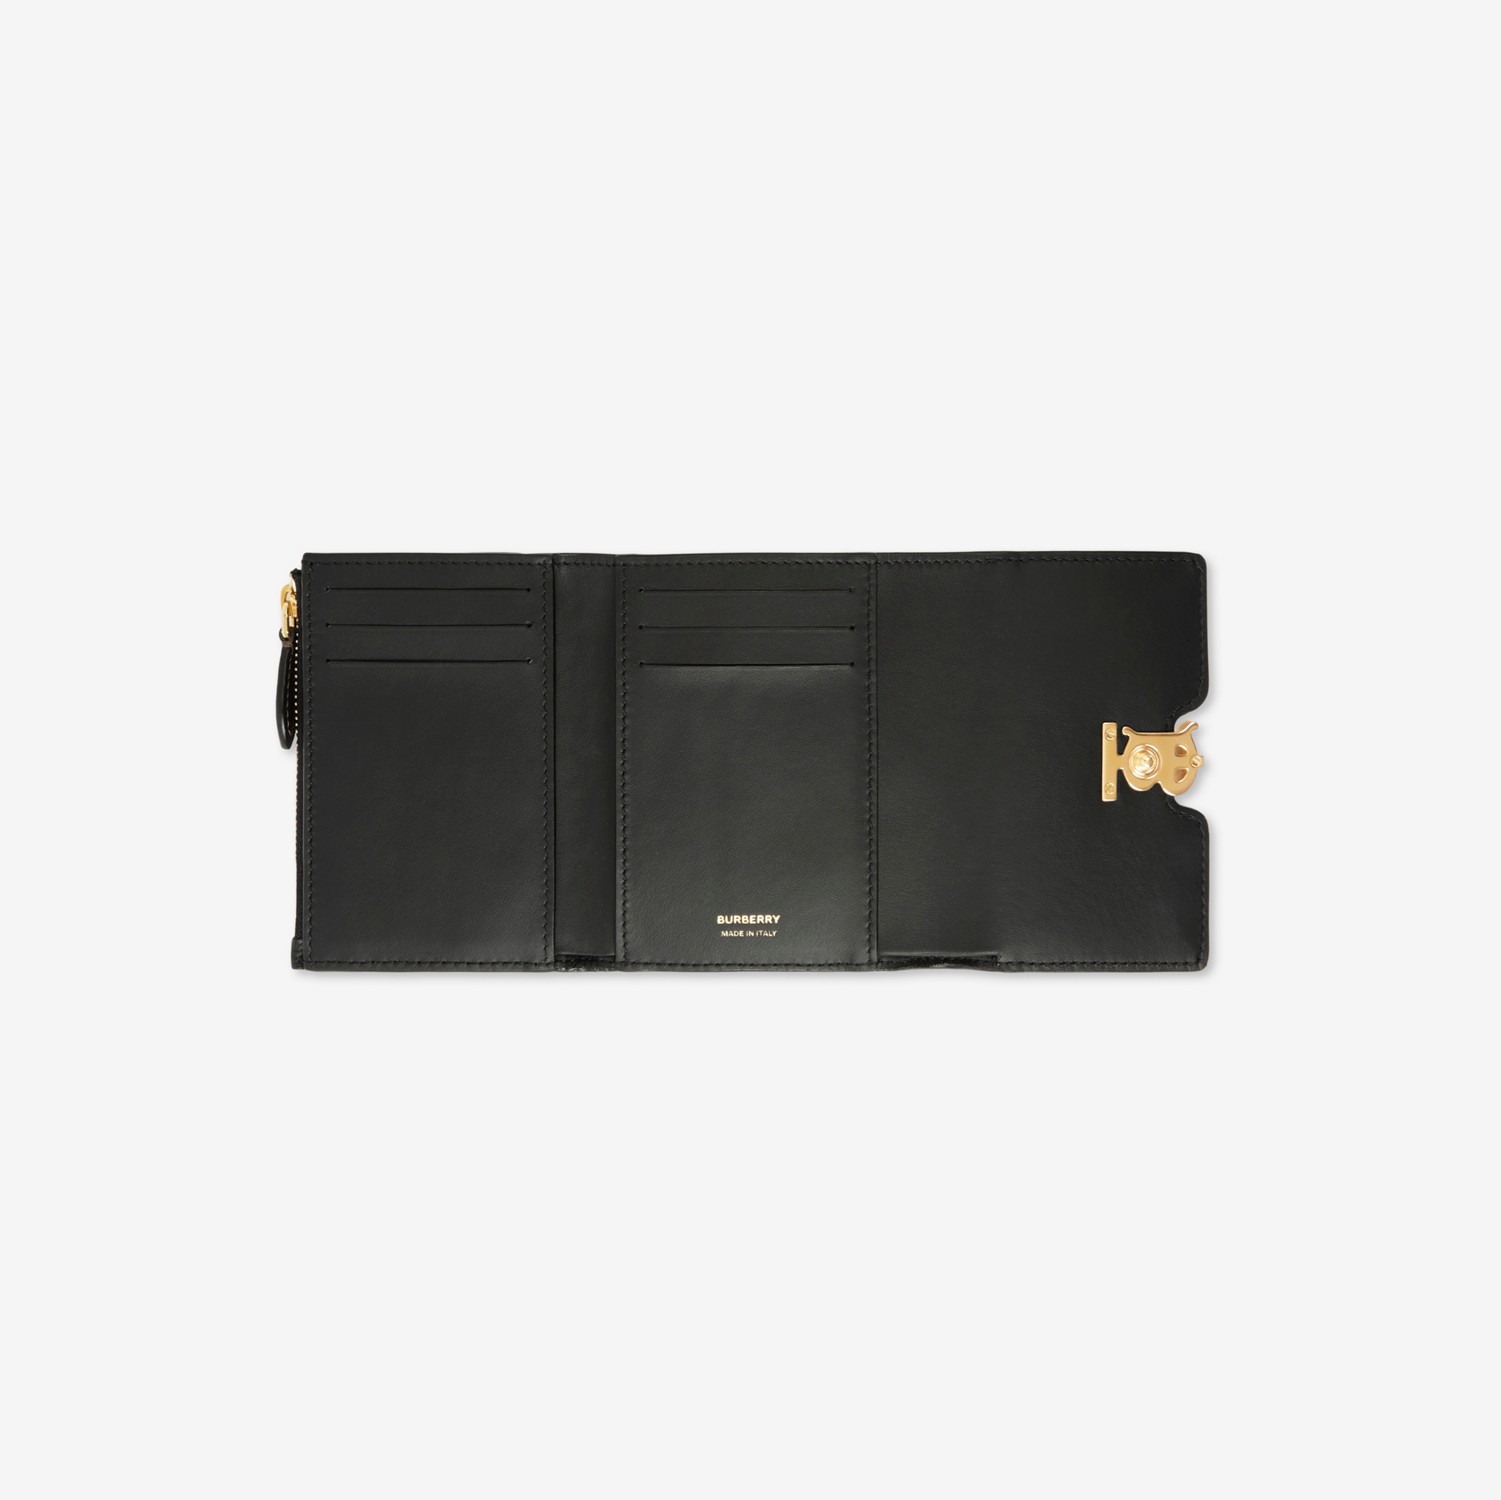 TB Compact Wallet